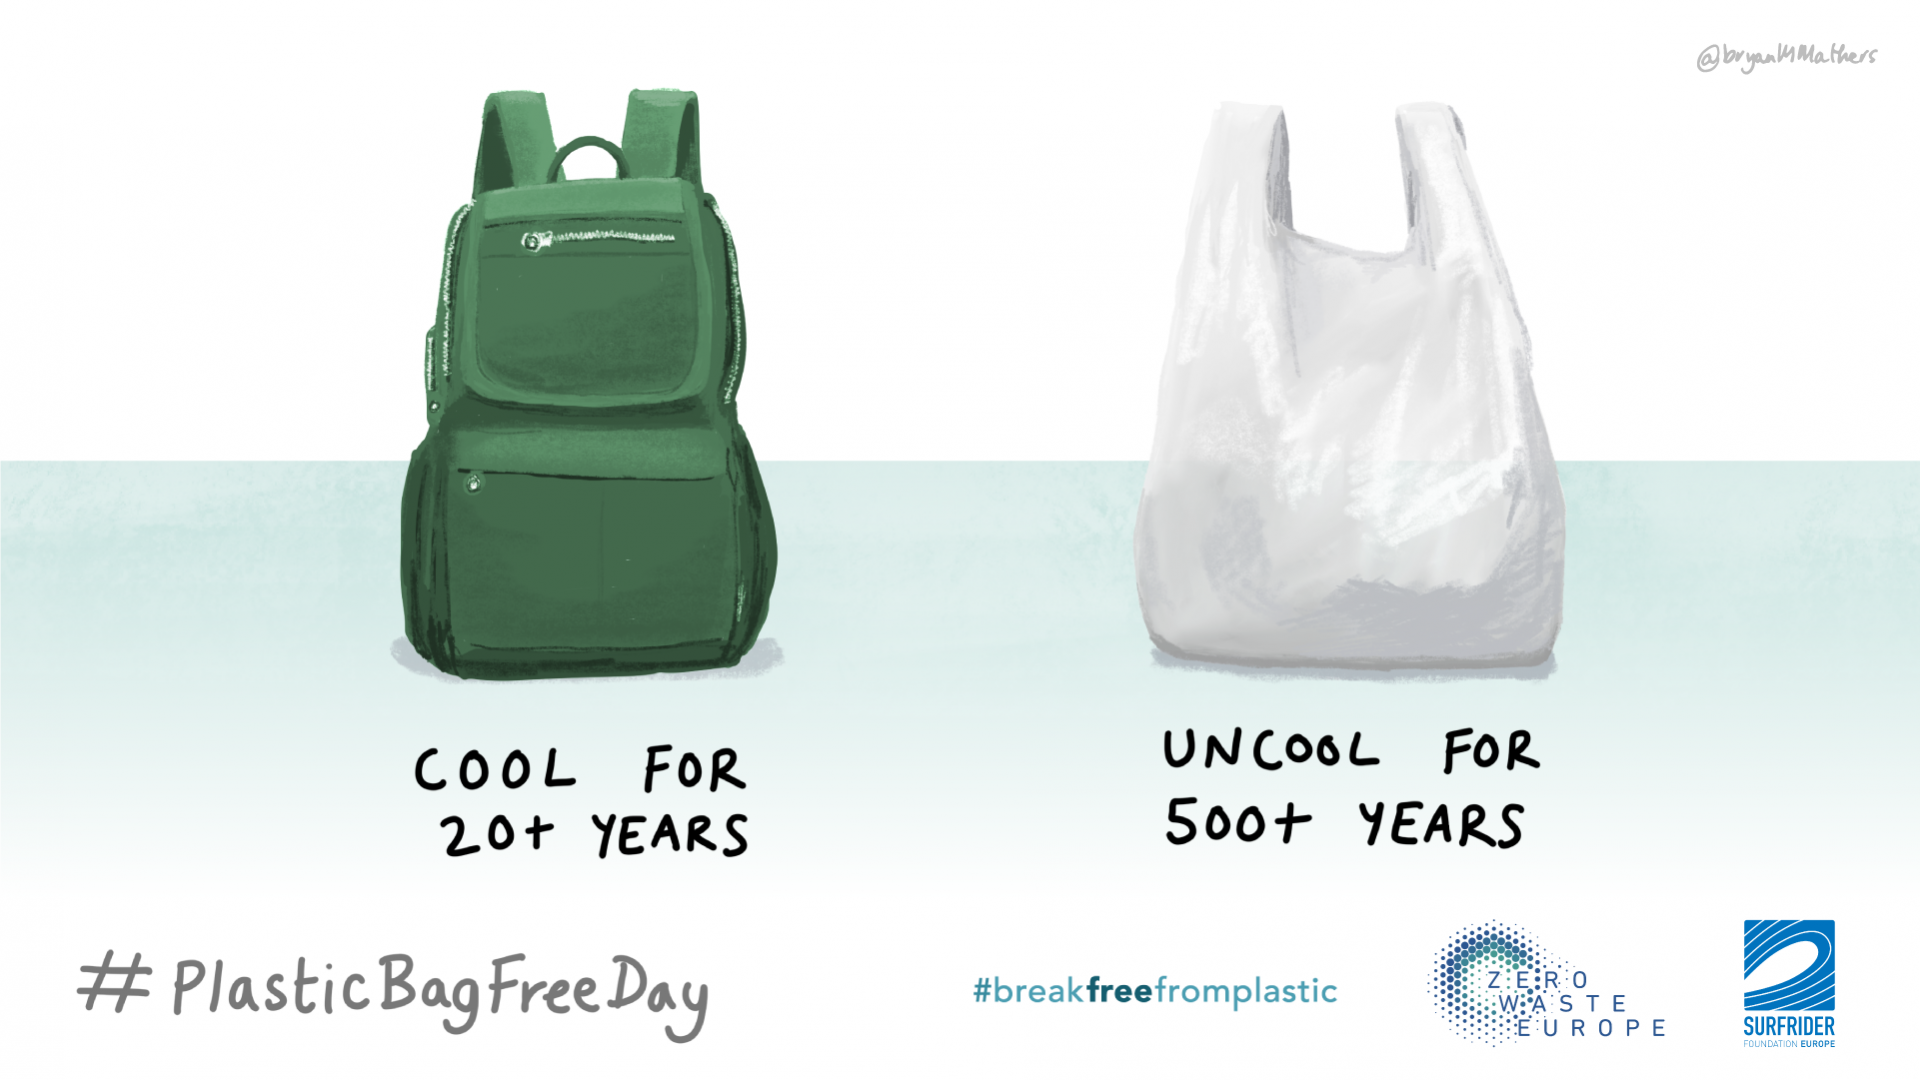 International Plastic Bag Free Day (July 3): History, Theme, Celebrations and Meaning to Our Environment